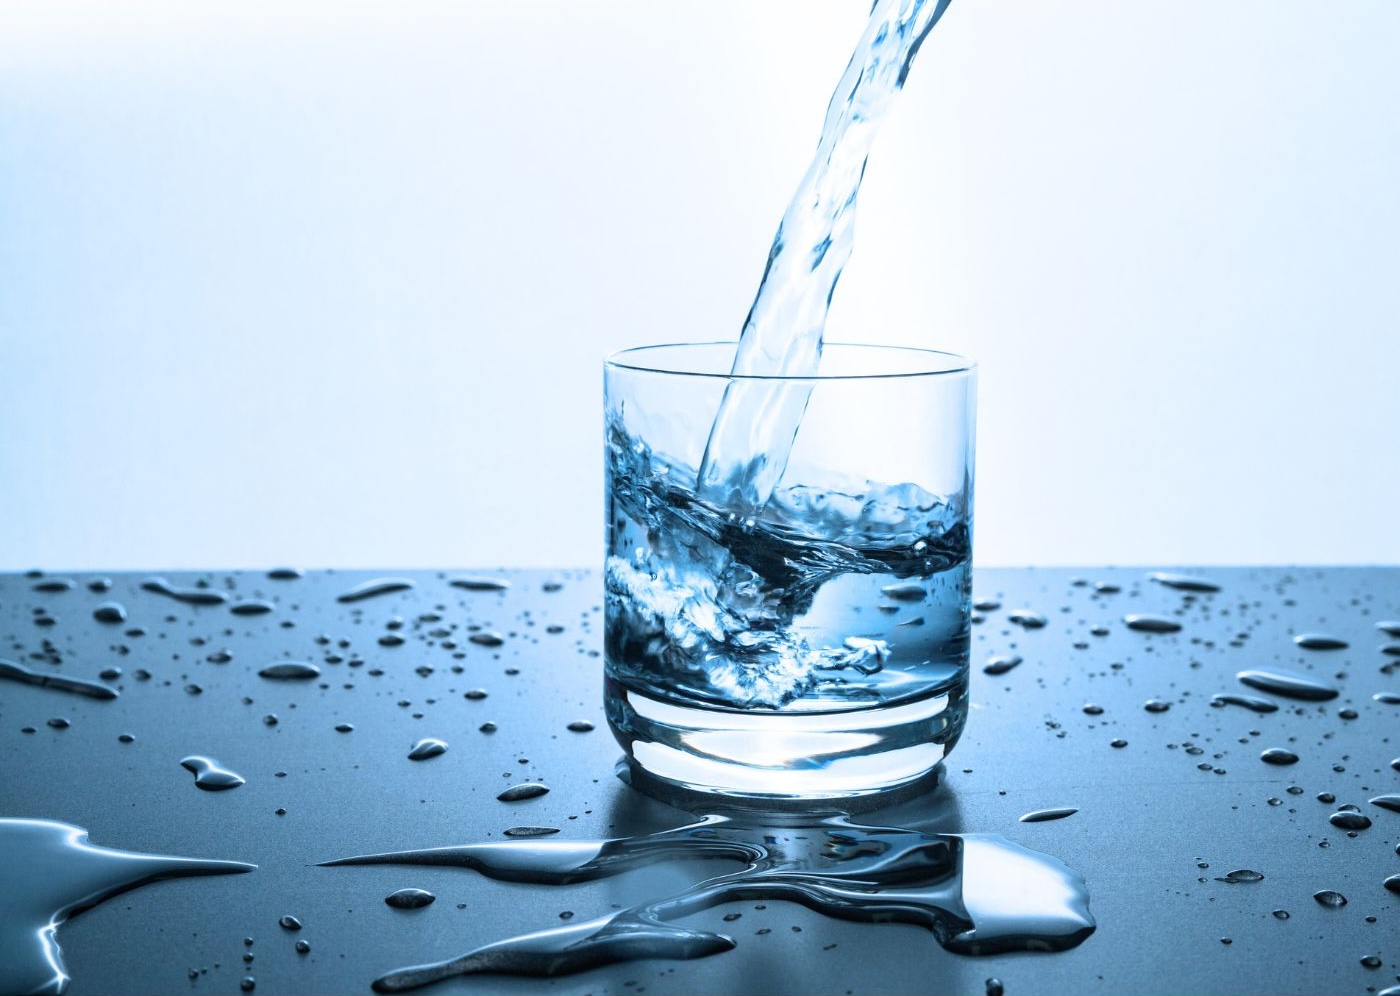 Drink more water and less alcohol to aid bladder and bowel health